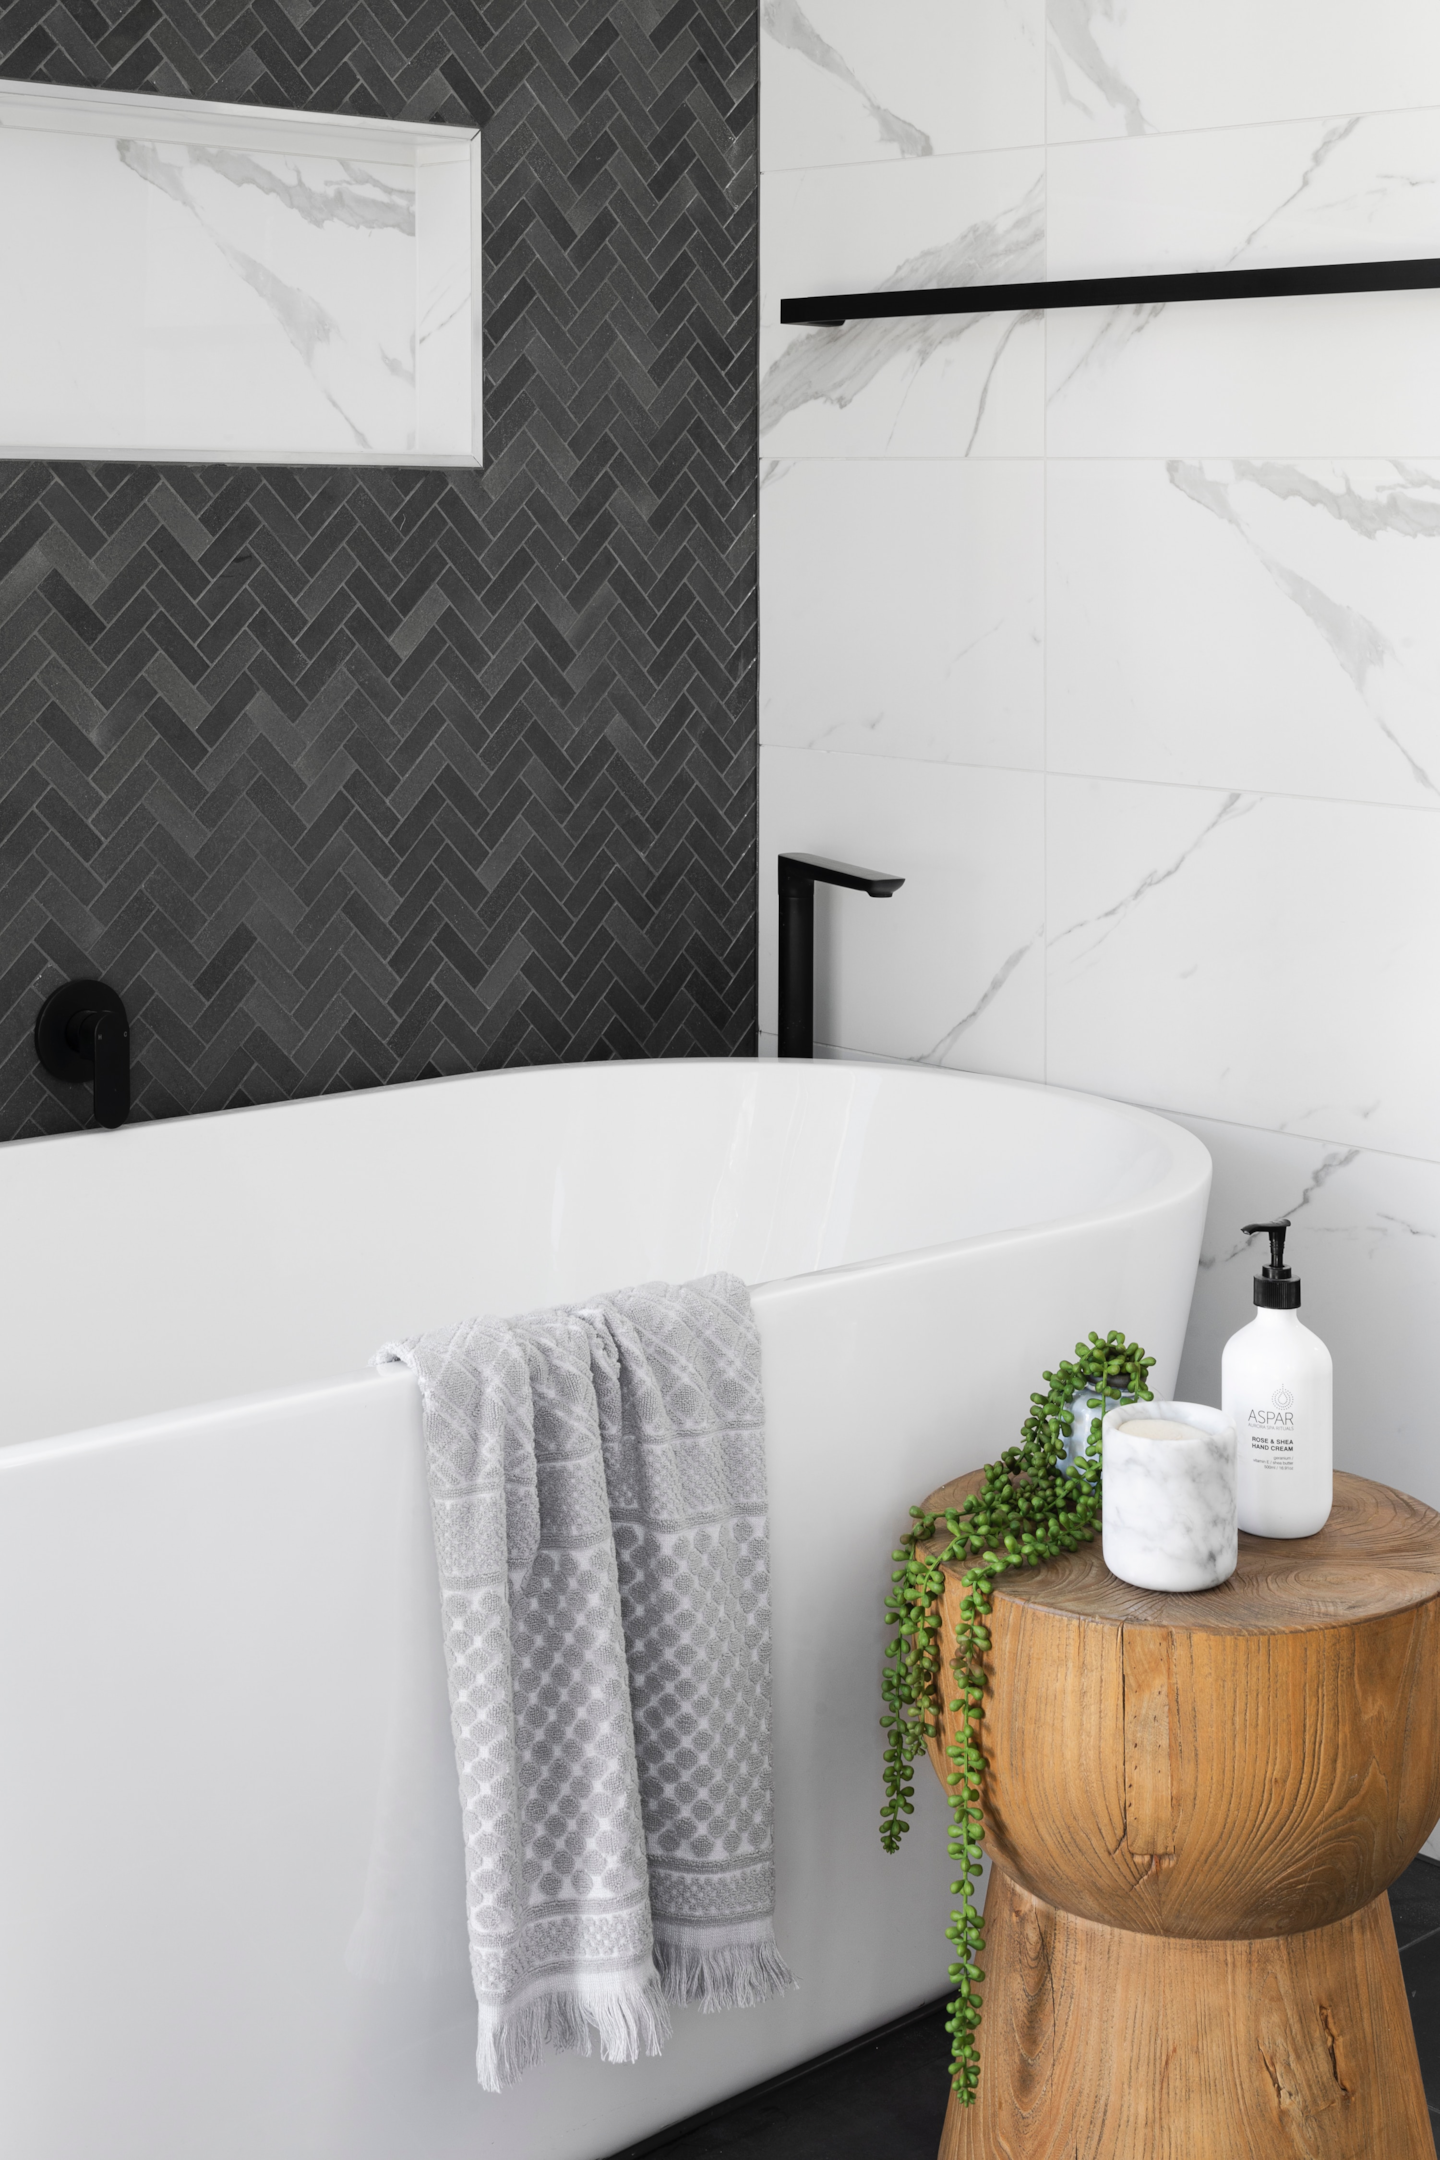 Simple bathroom tile ideas, such as mixing large format floor tiles with monochrome wall tile designs brings a sleek and sophisticated look to any space.